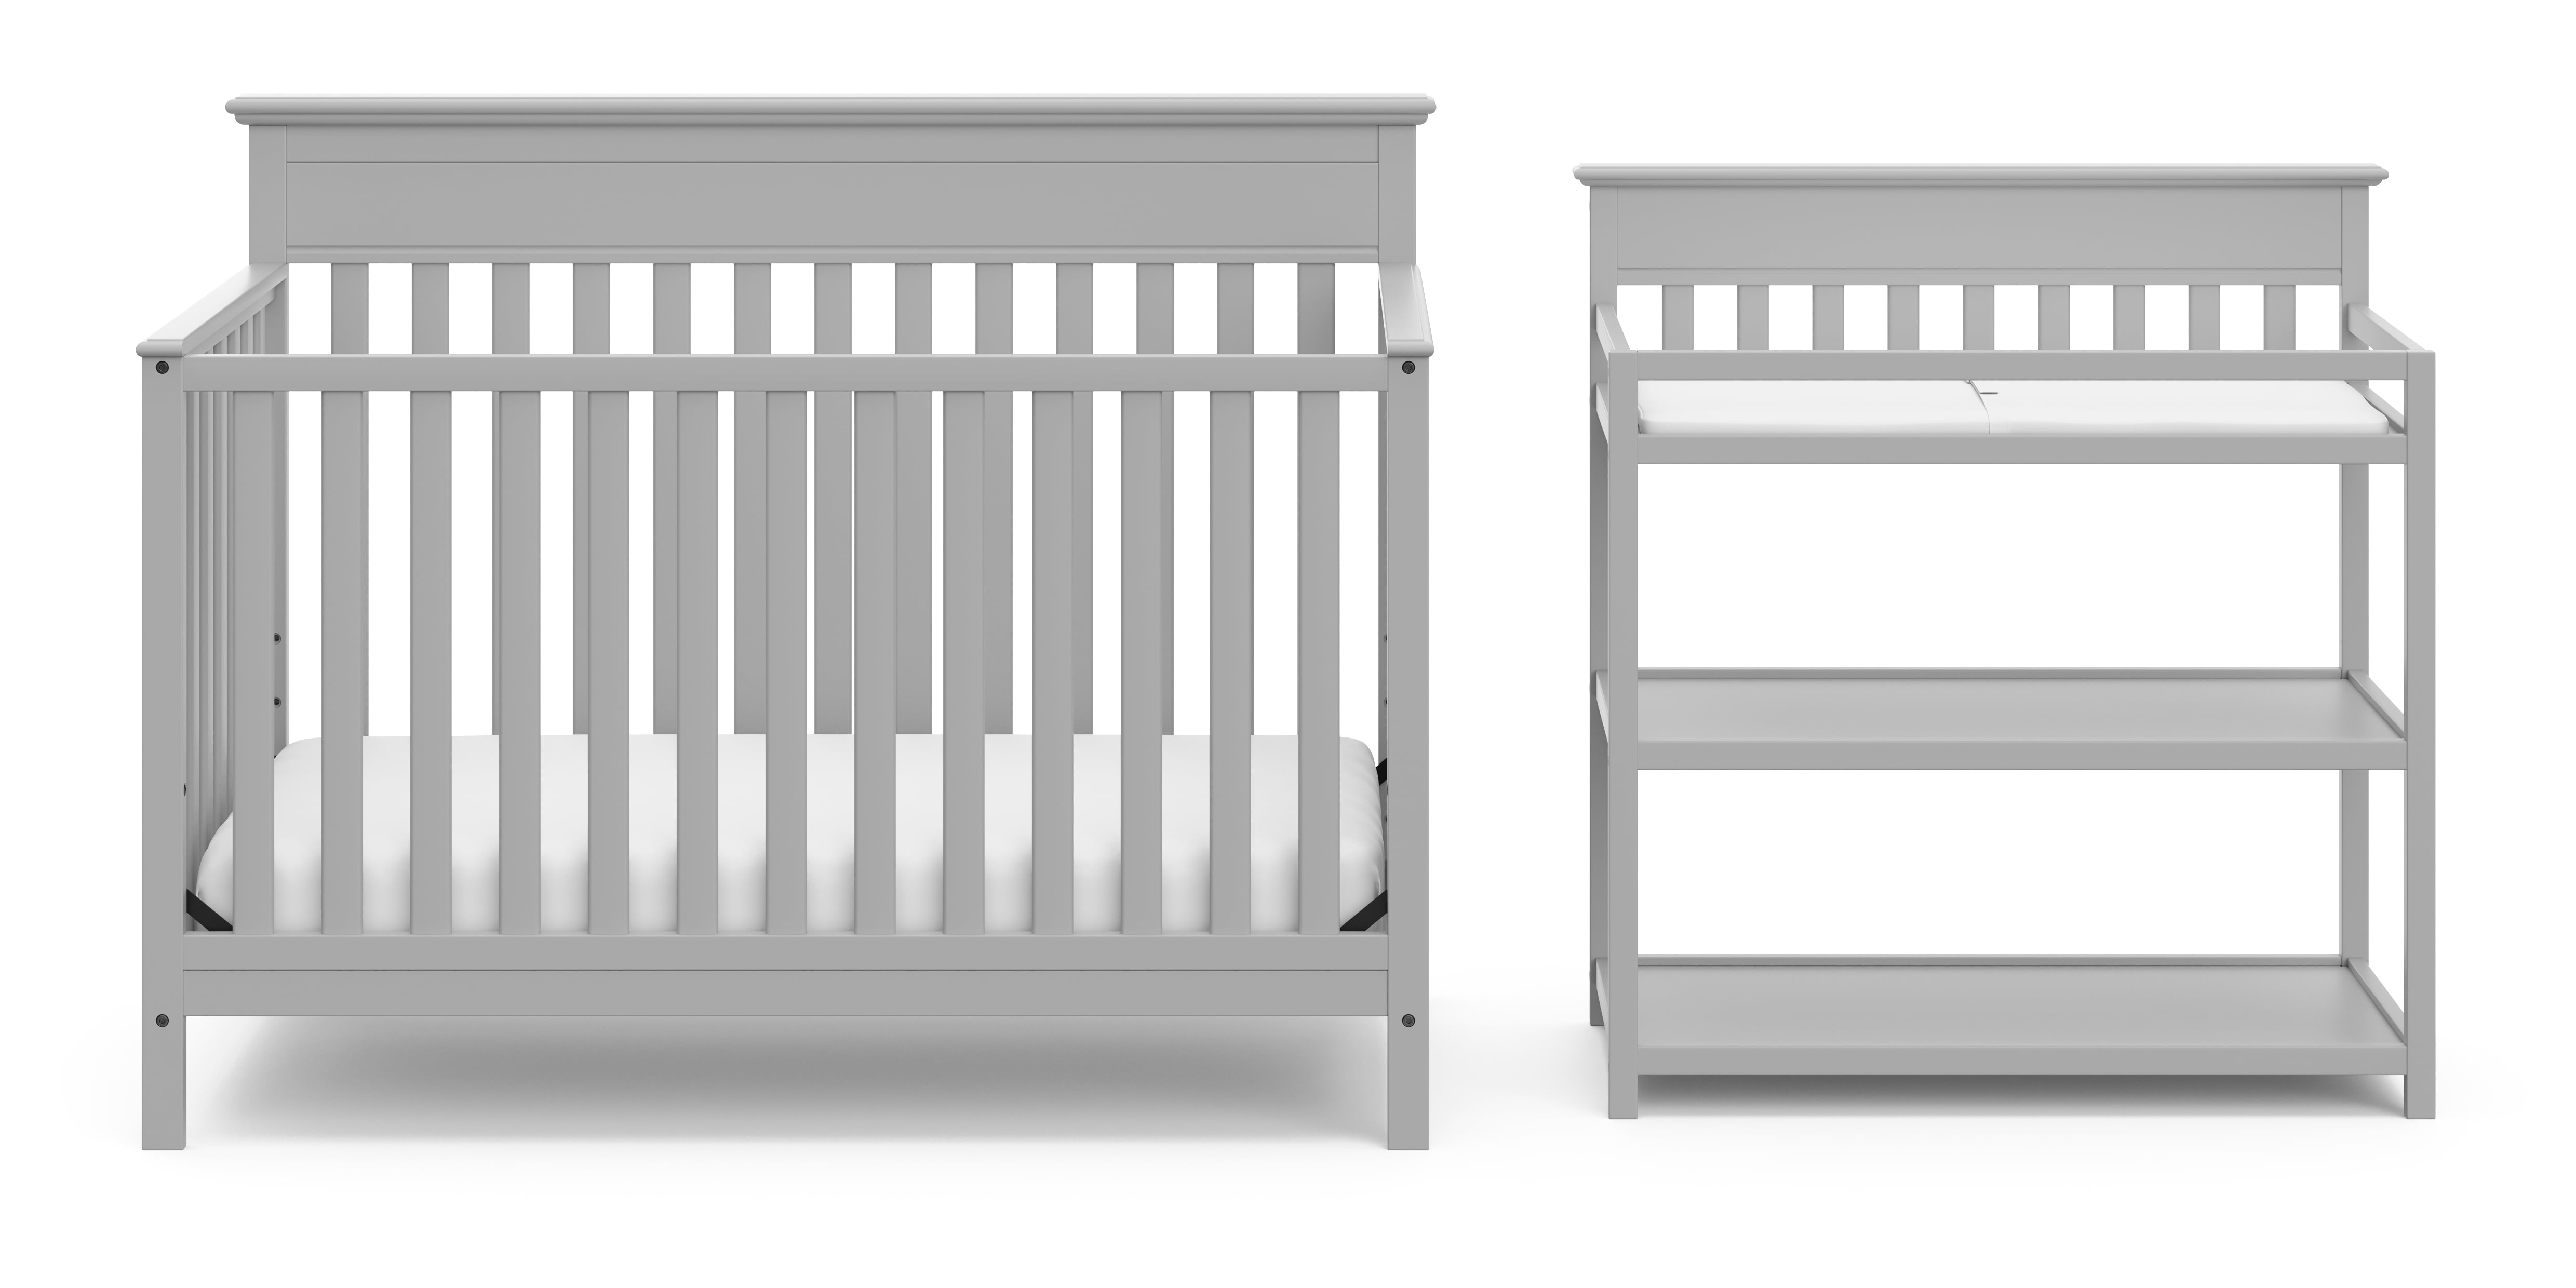 white crib and changing table set